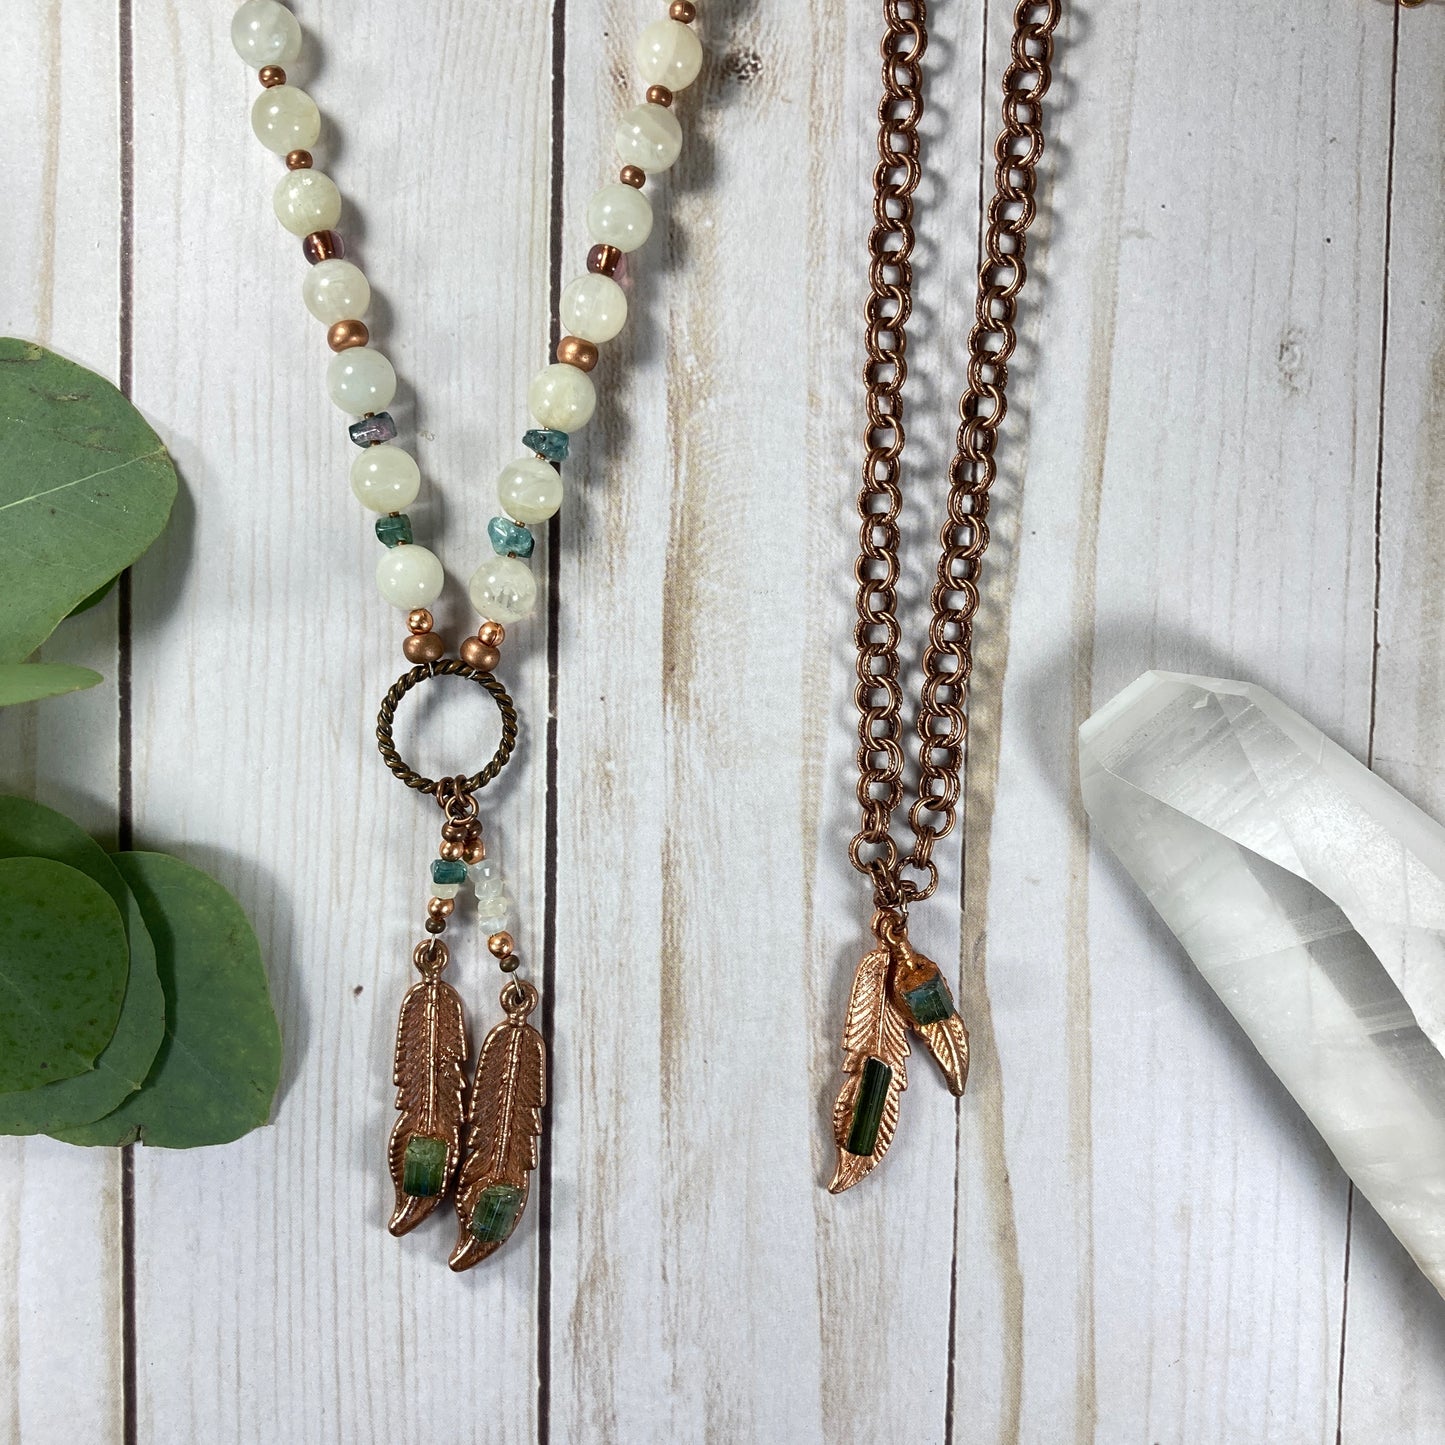 Moonstone Beaded Necklace with Feathers